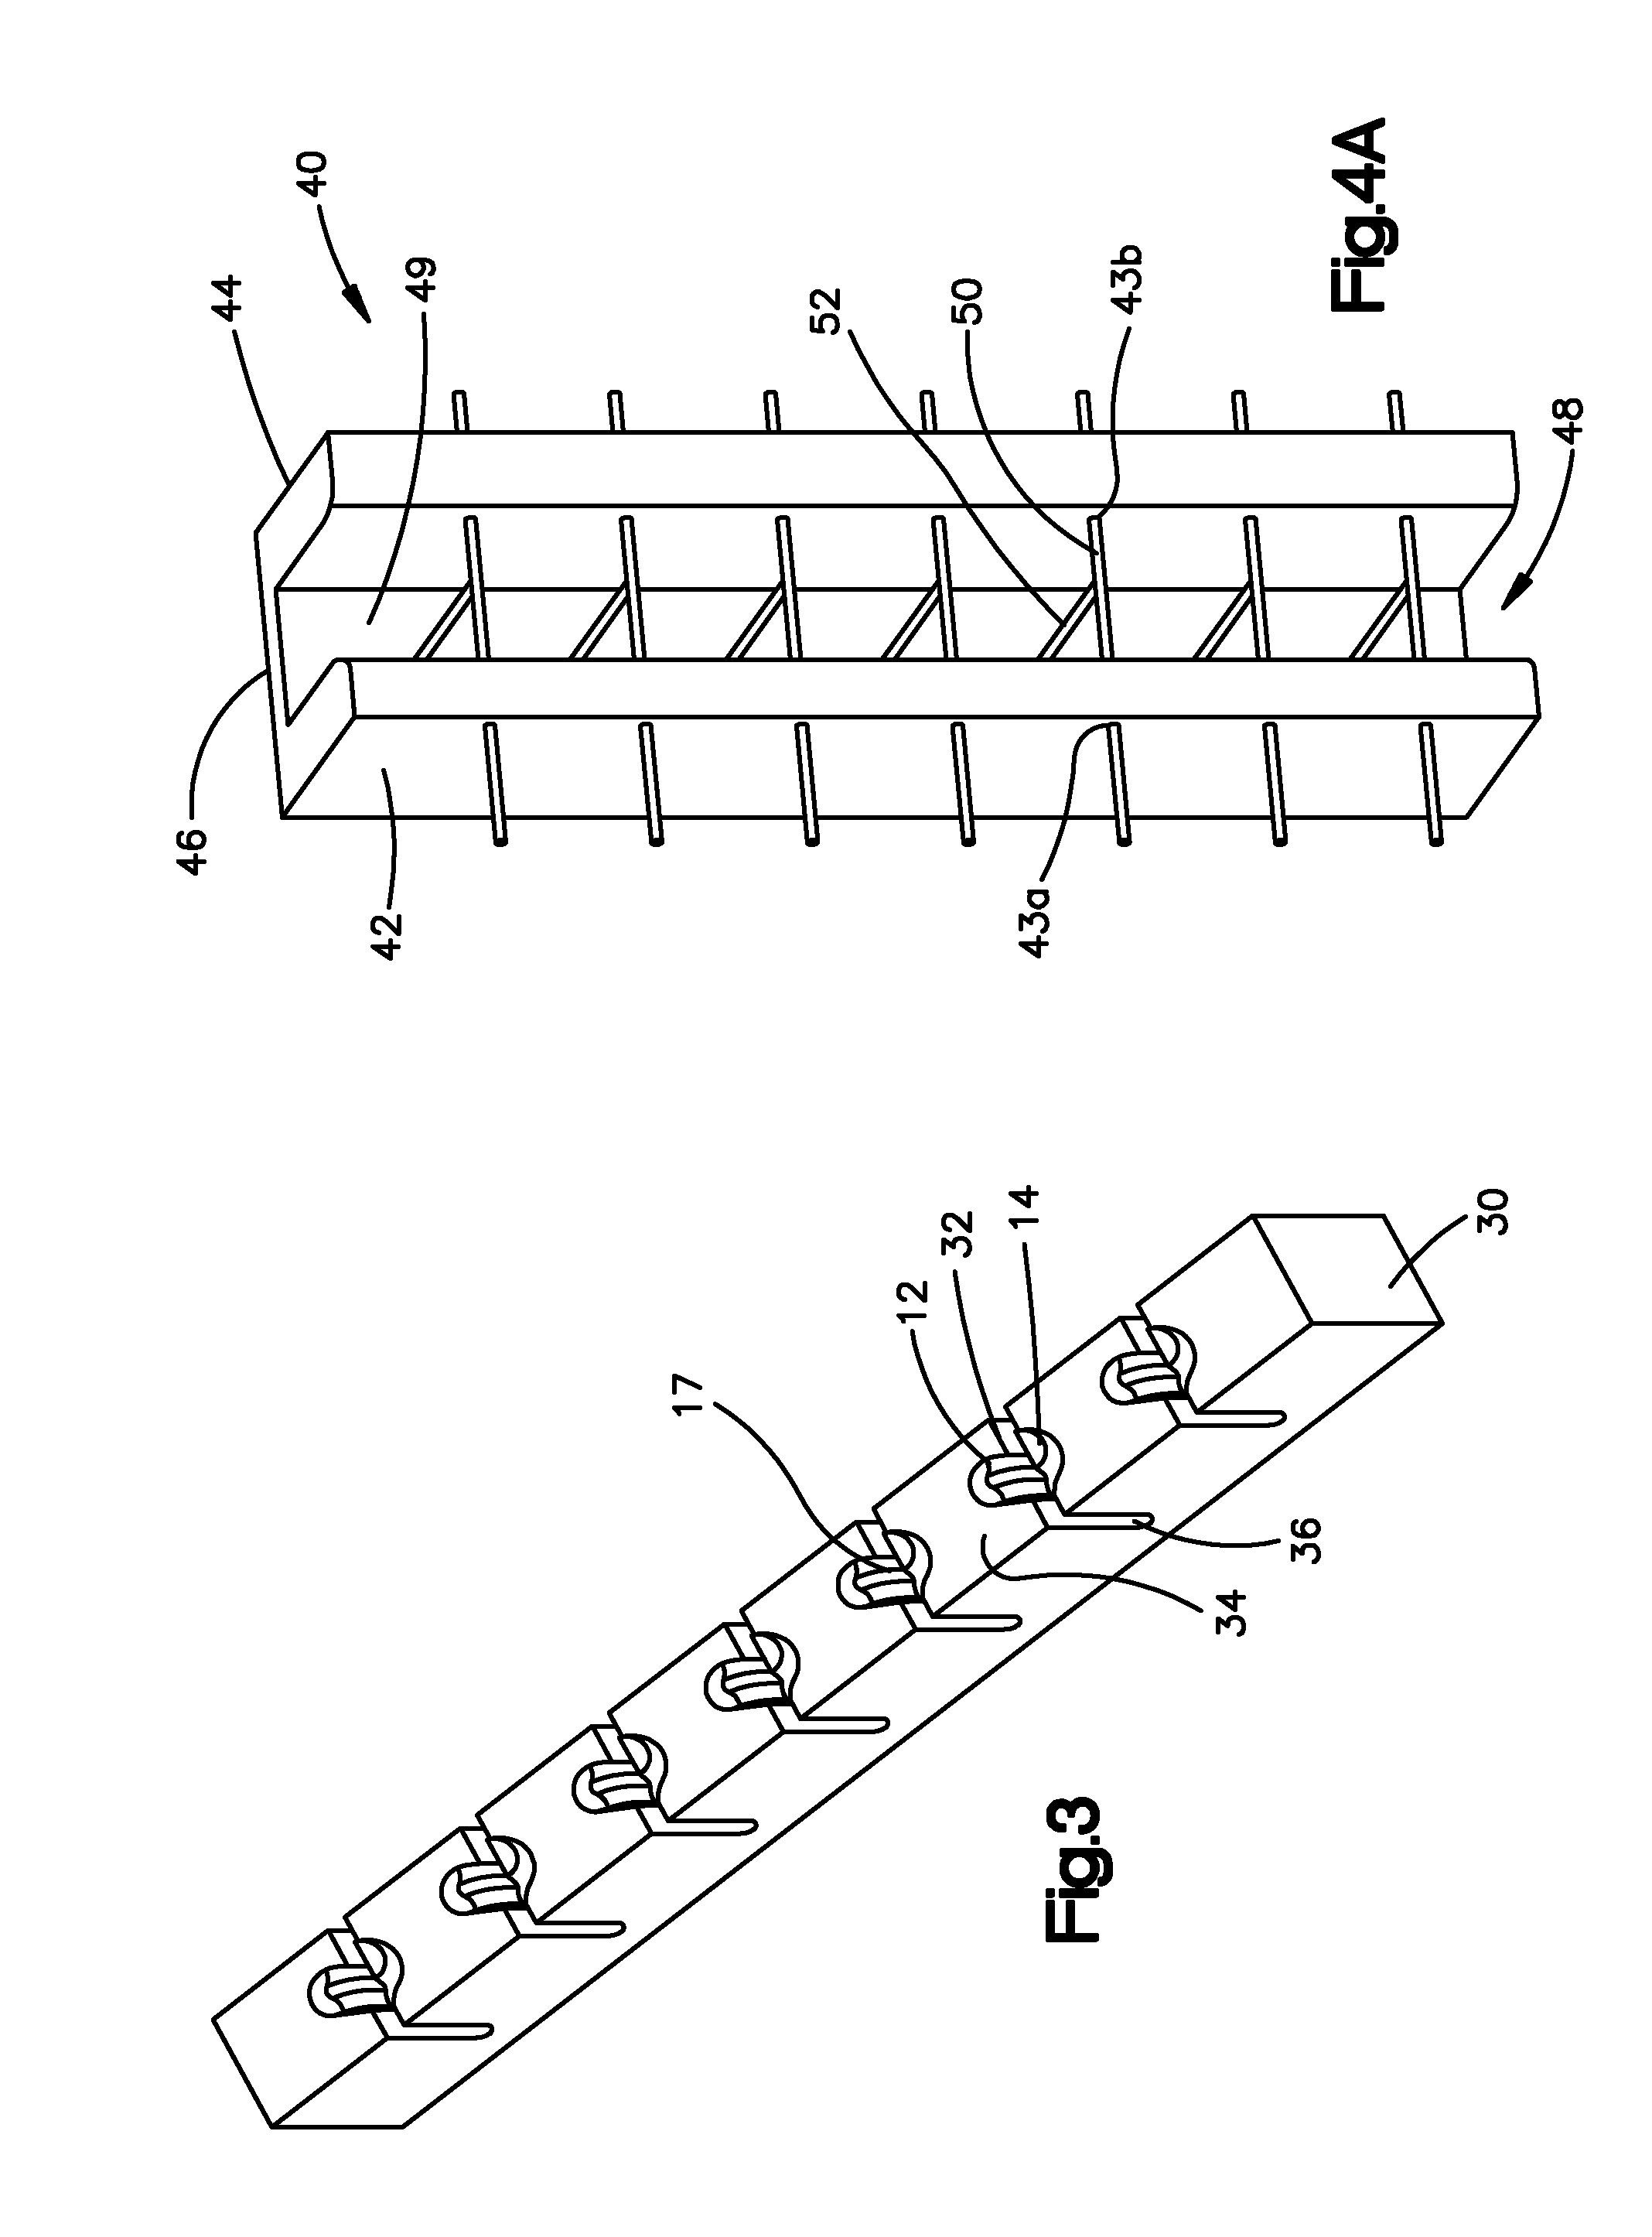 Apparatus and methods for programming a shape-memory medical device implant